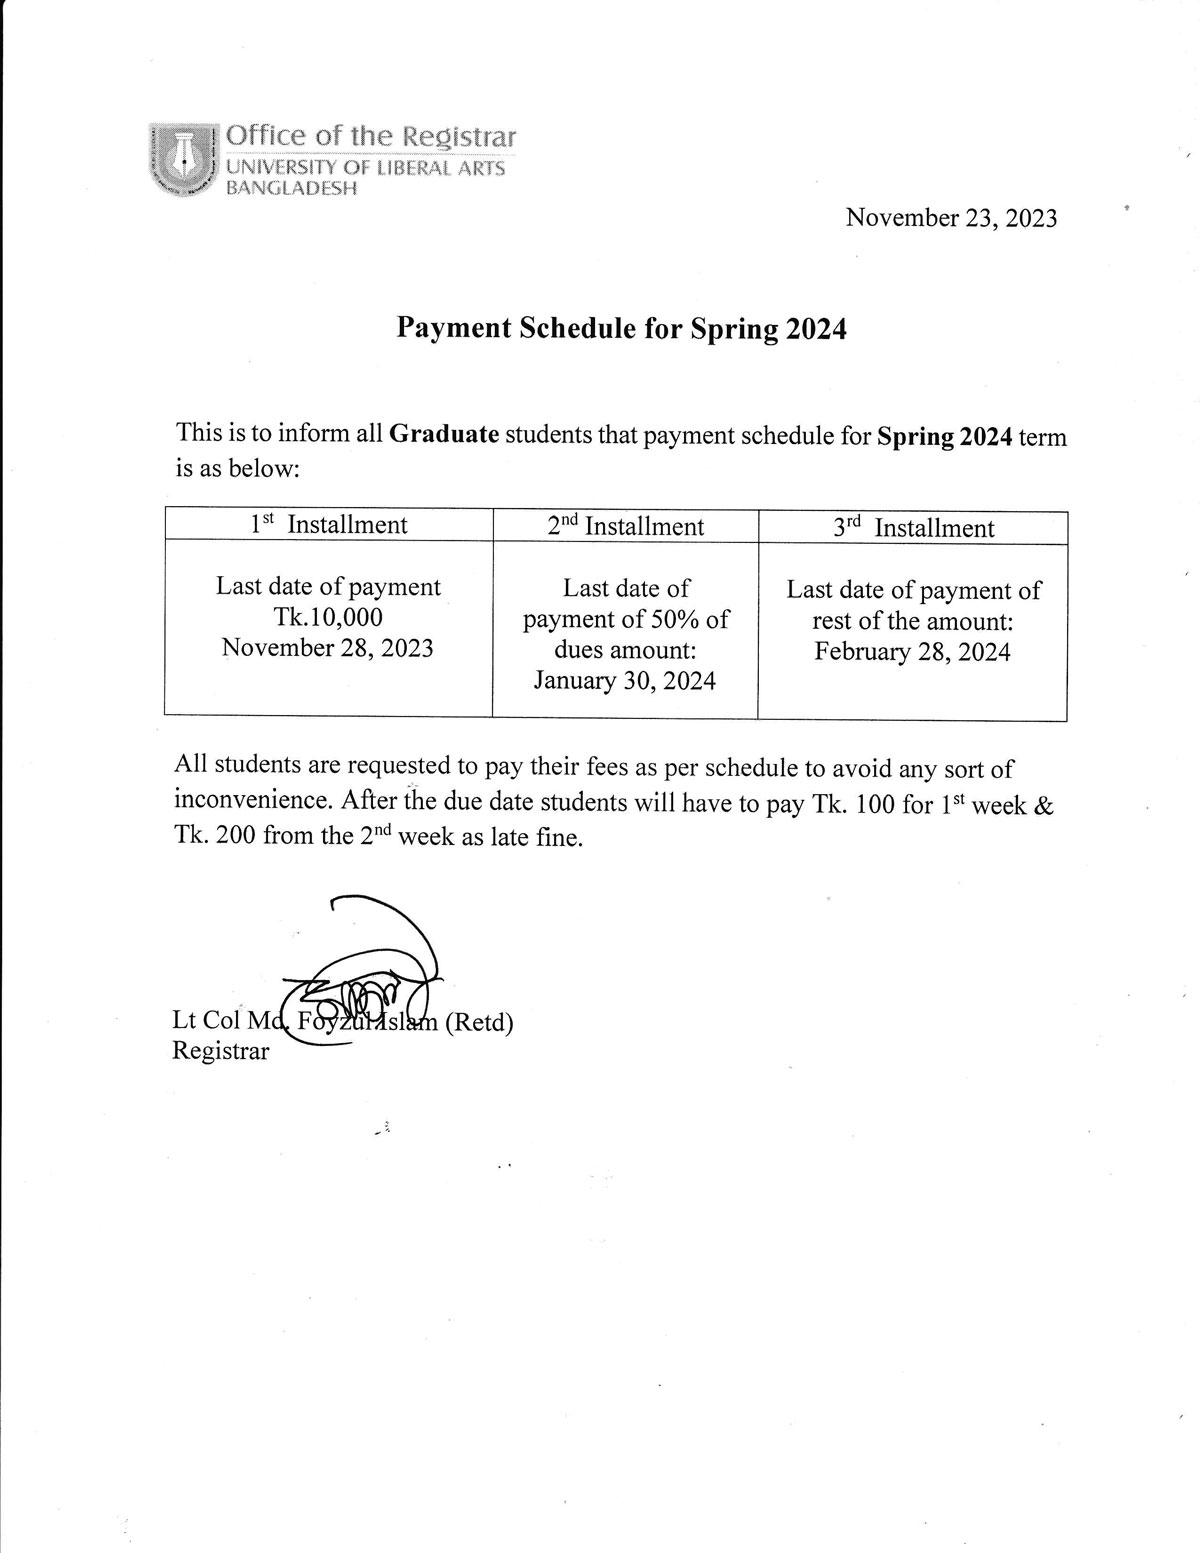 Payment Guideline Schedule for Spring 2024 Registrar Office